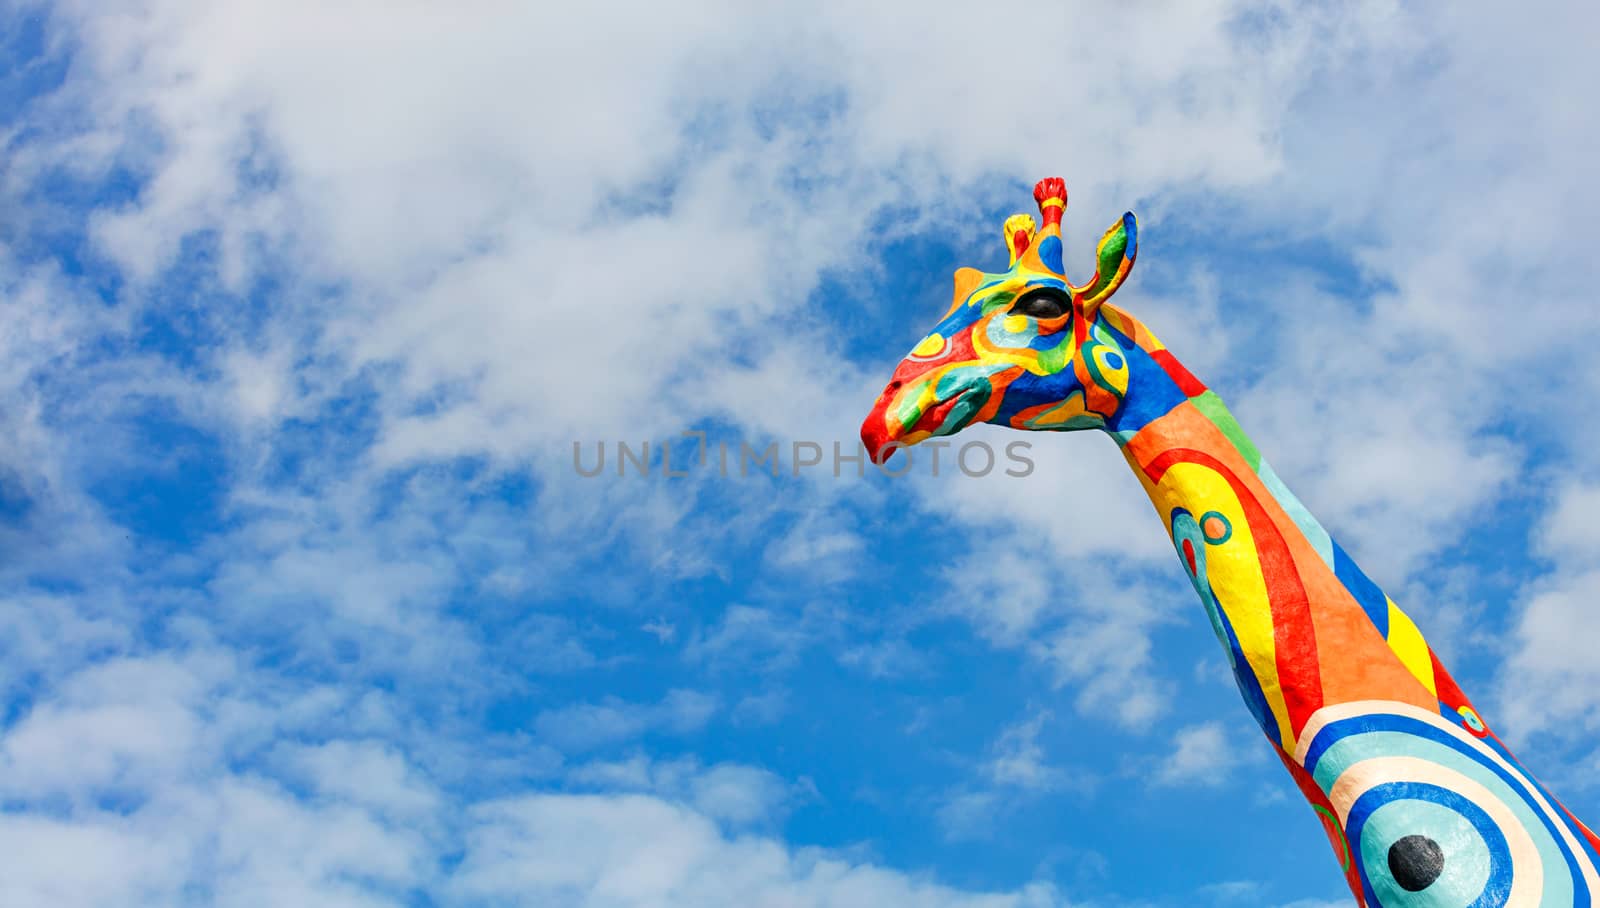 Painted cheerful giraffe head against a blue, slightly cloudy sky in sunlight, copy space.